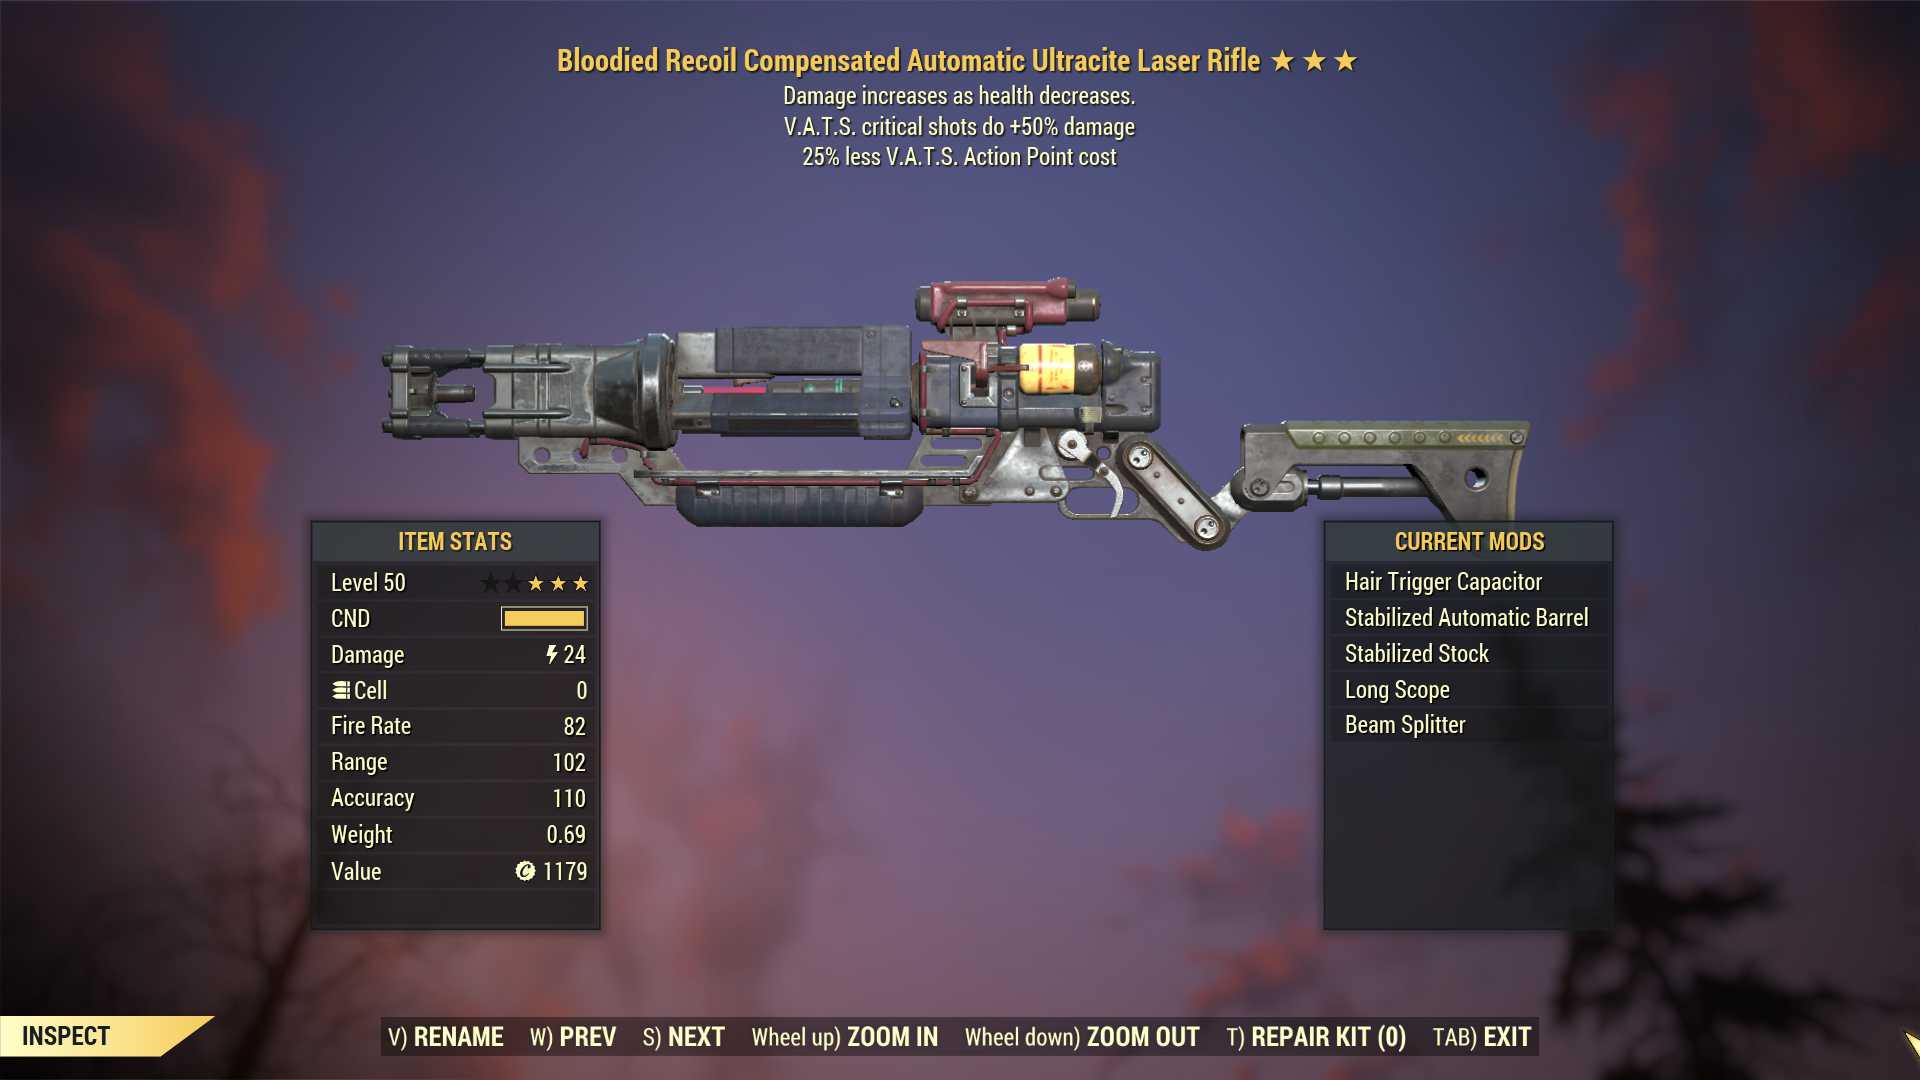 Bloodied Ultracite Laser rifle (+50% critical damage, 25% less VATS AP cost)